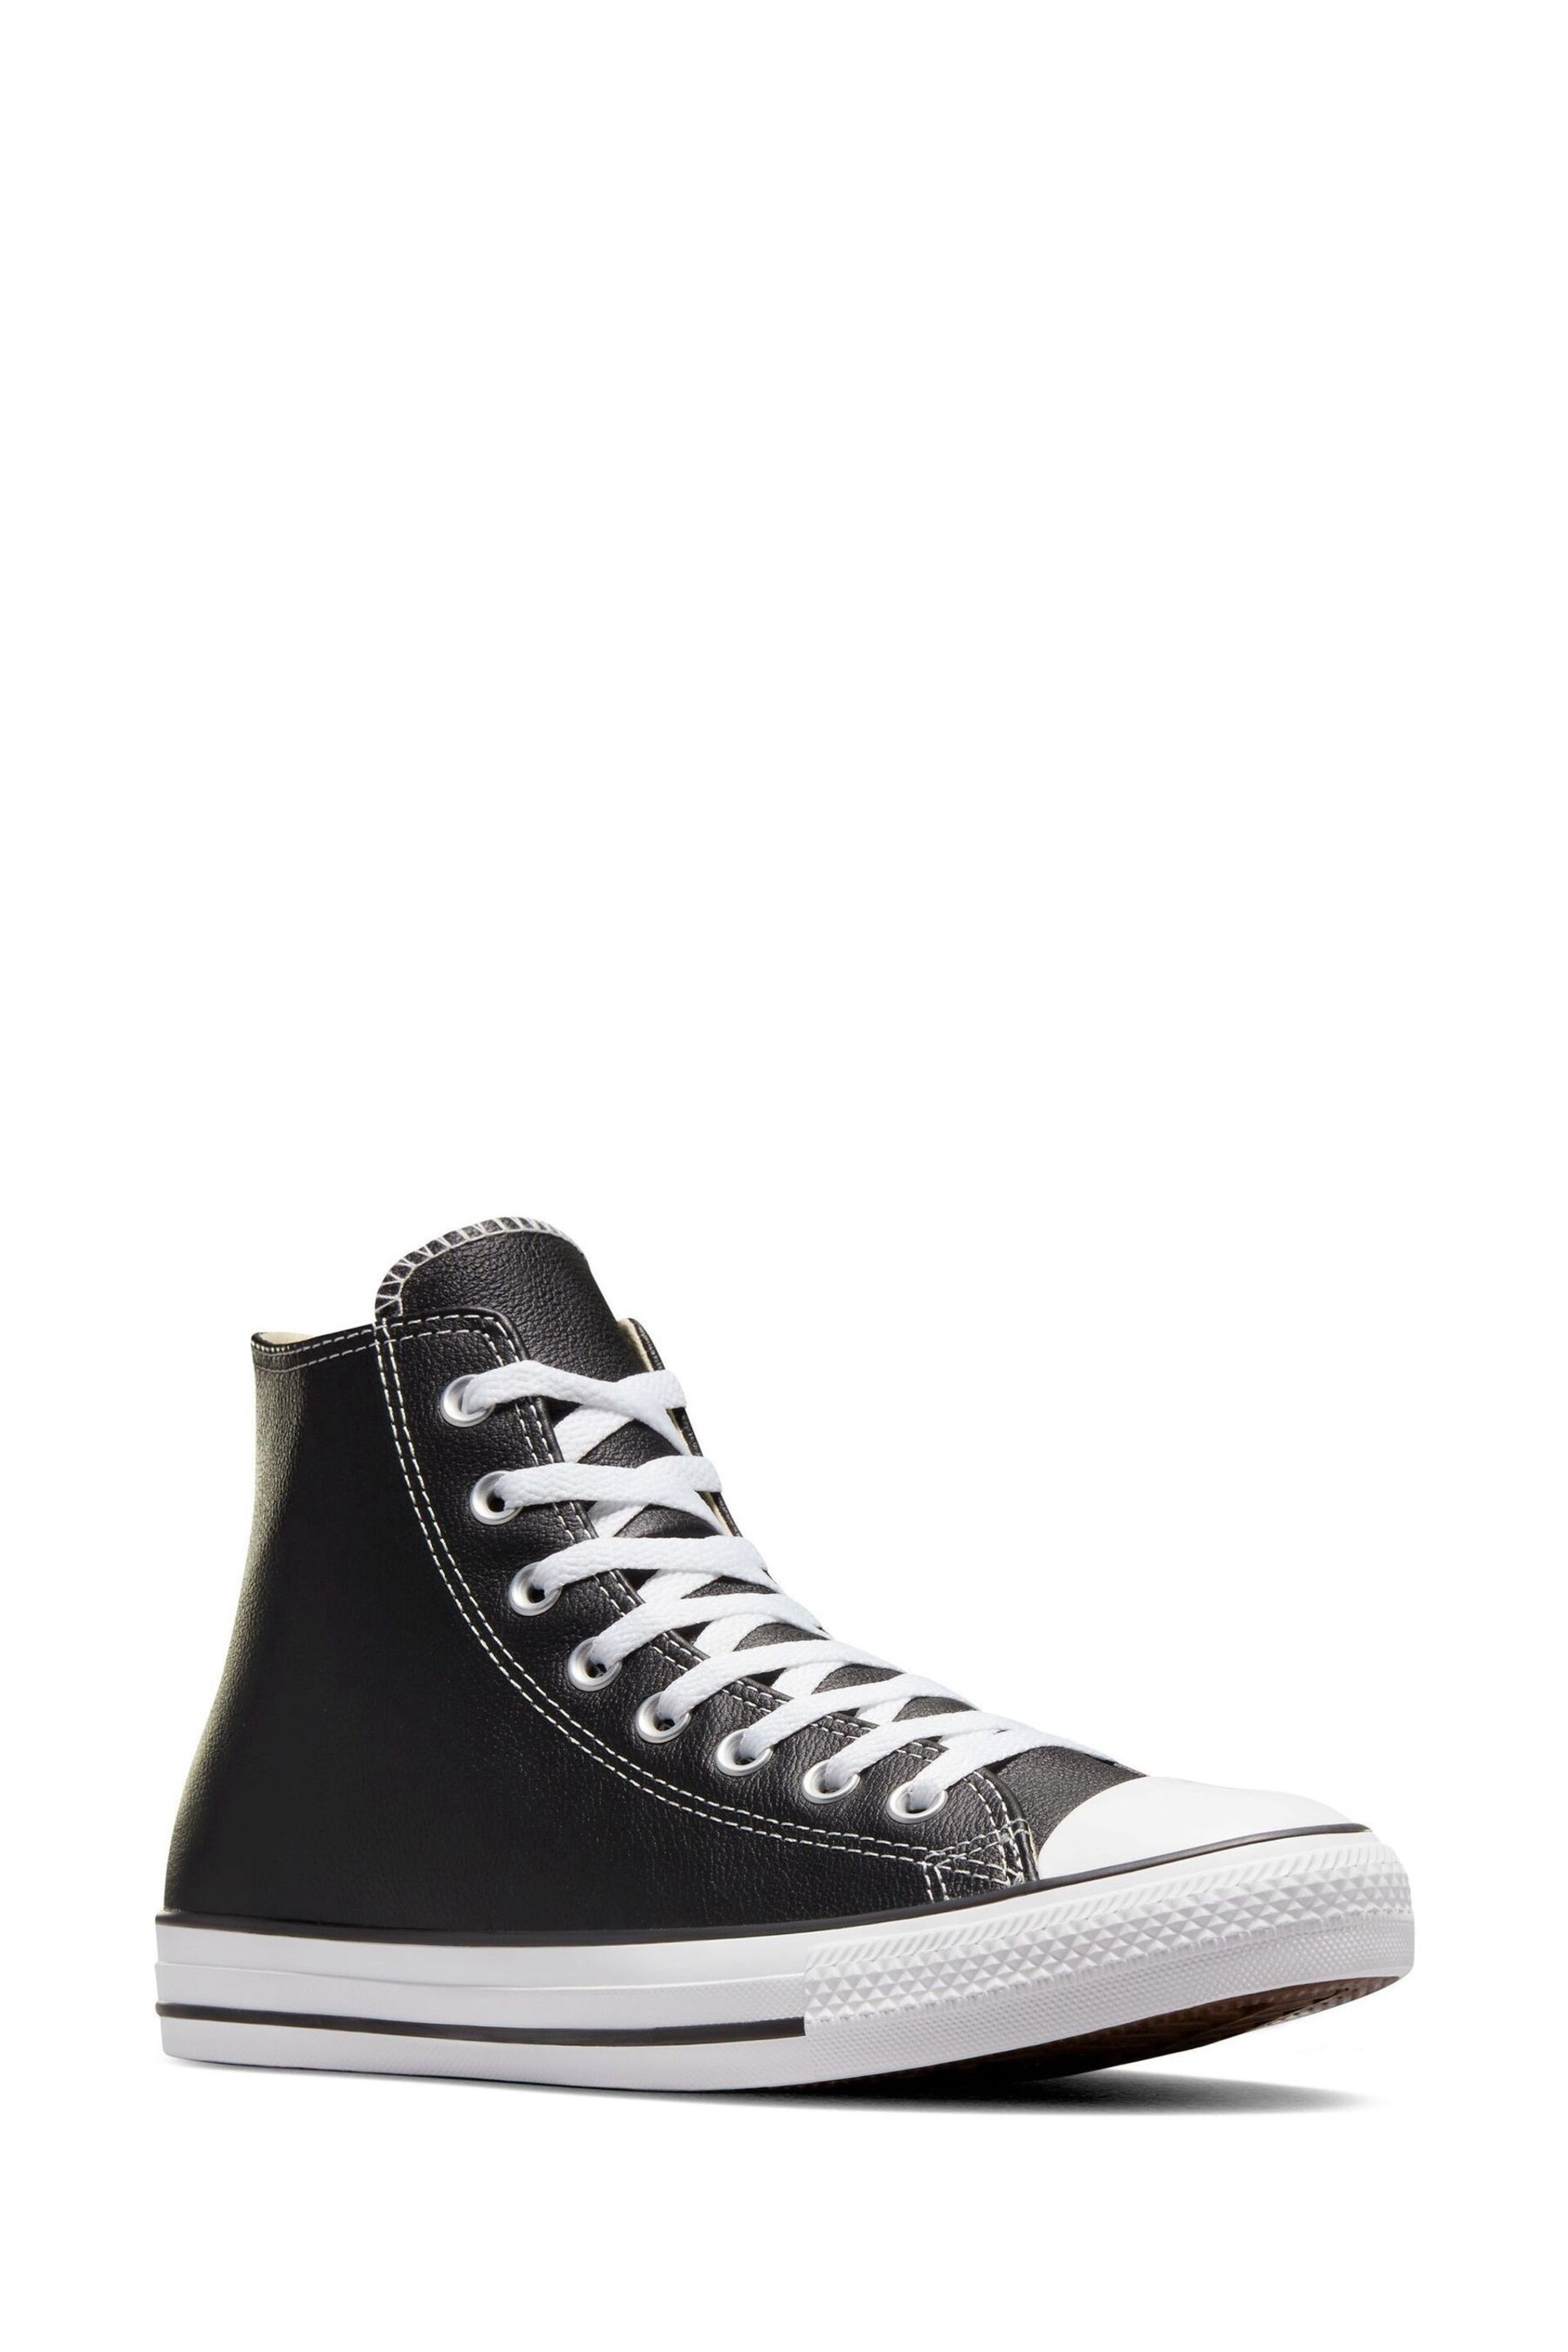 Converse Black Leather Chuck Taylor All Star High Top Trainers - Image 6 of 11